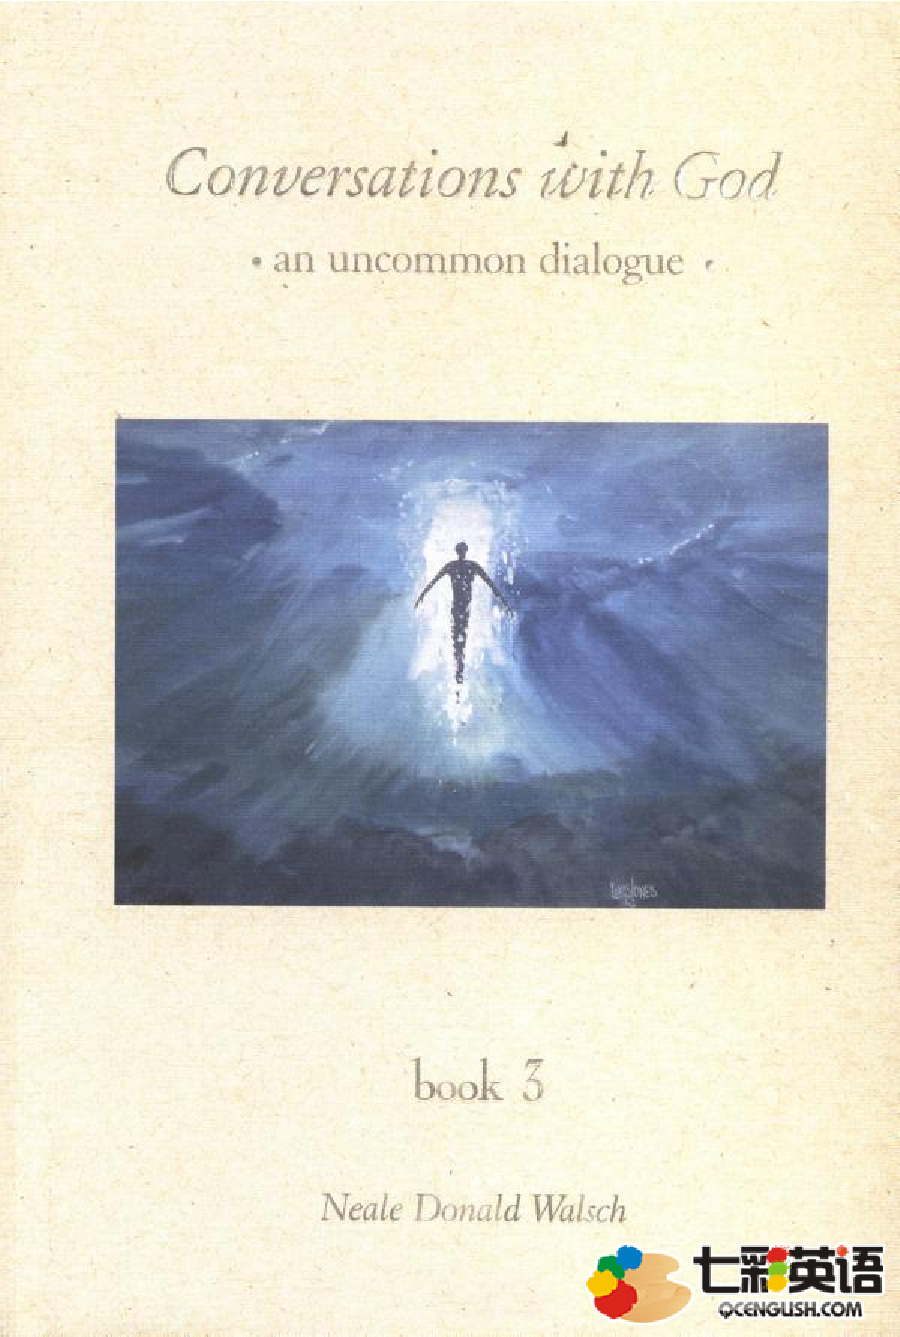 Conversations With God An Uncommon Dialogue (Book 3) – Neale Donald Walsch